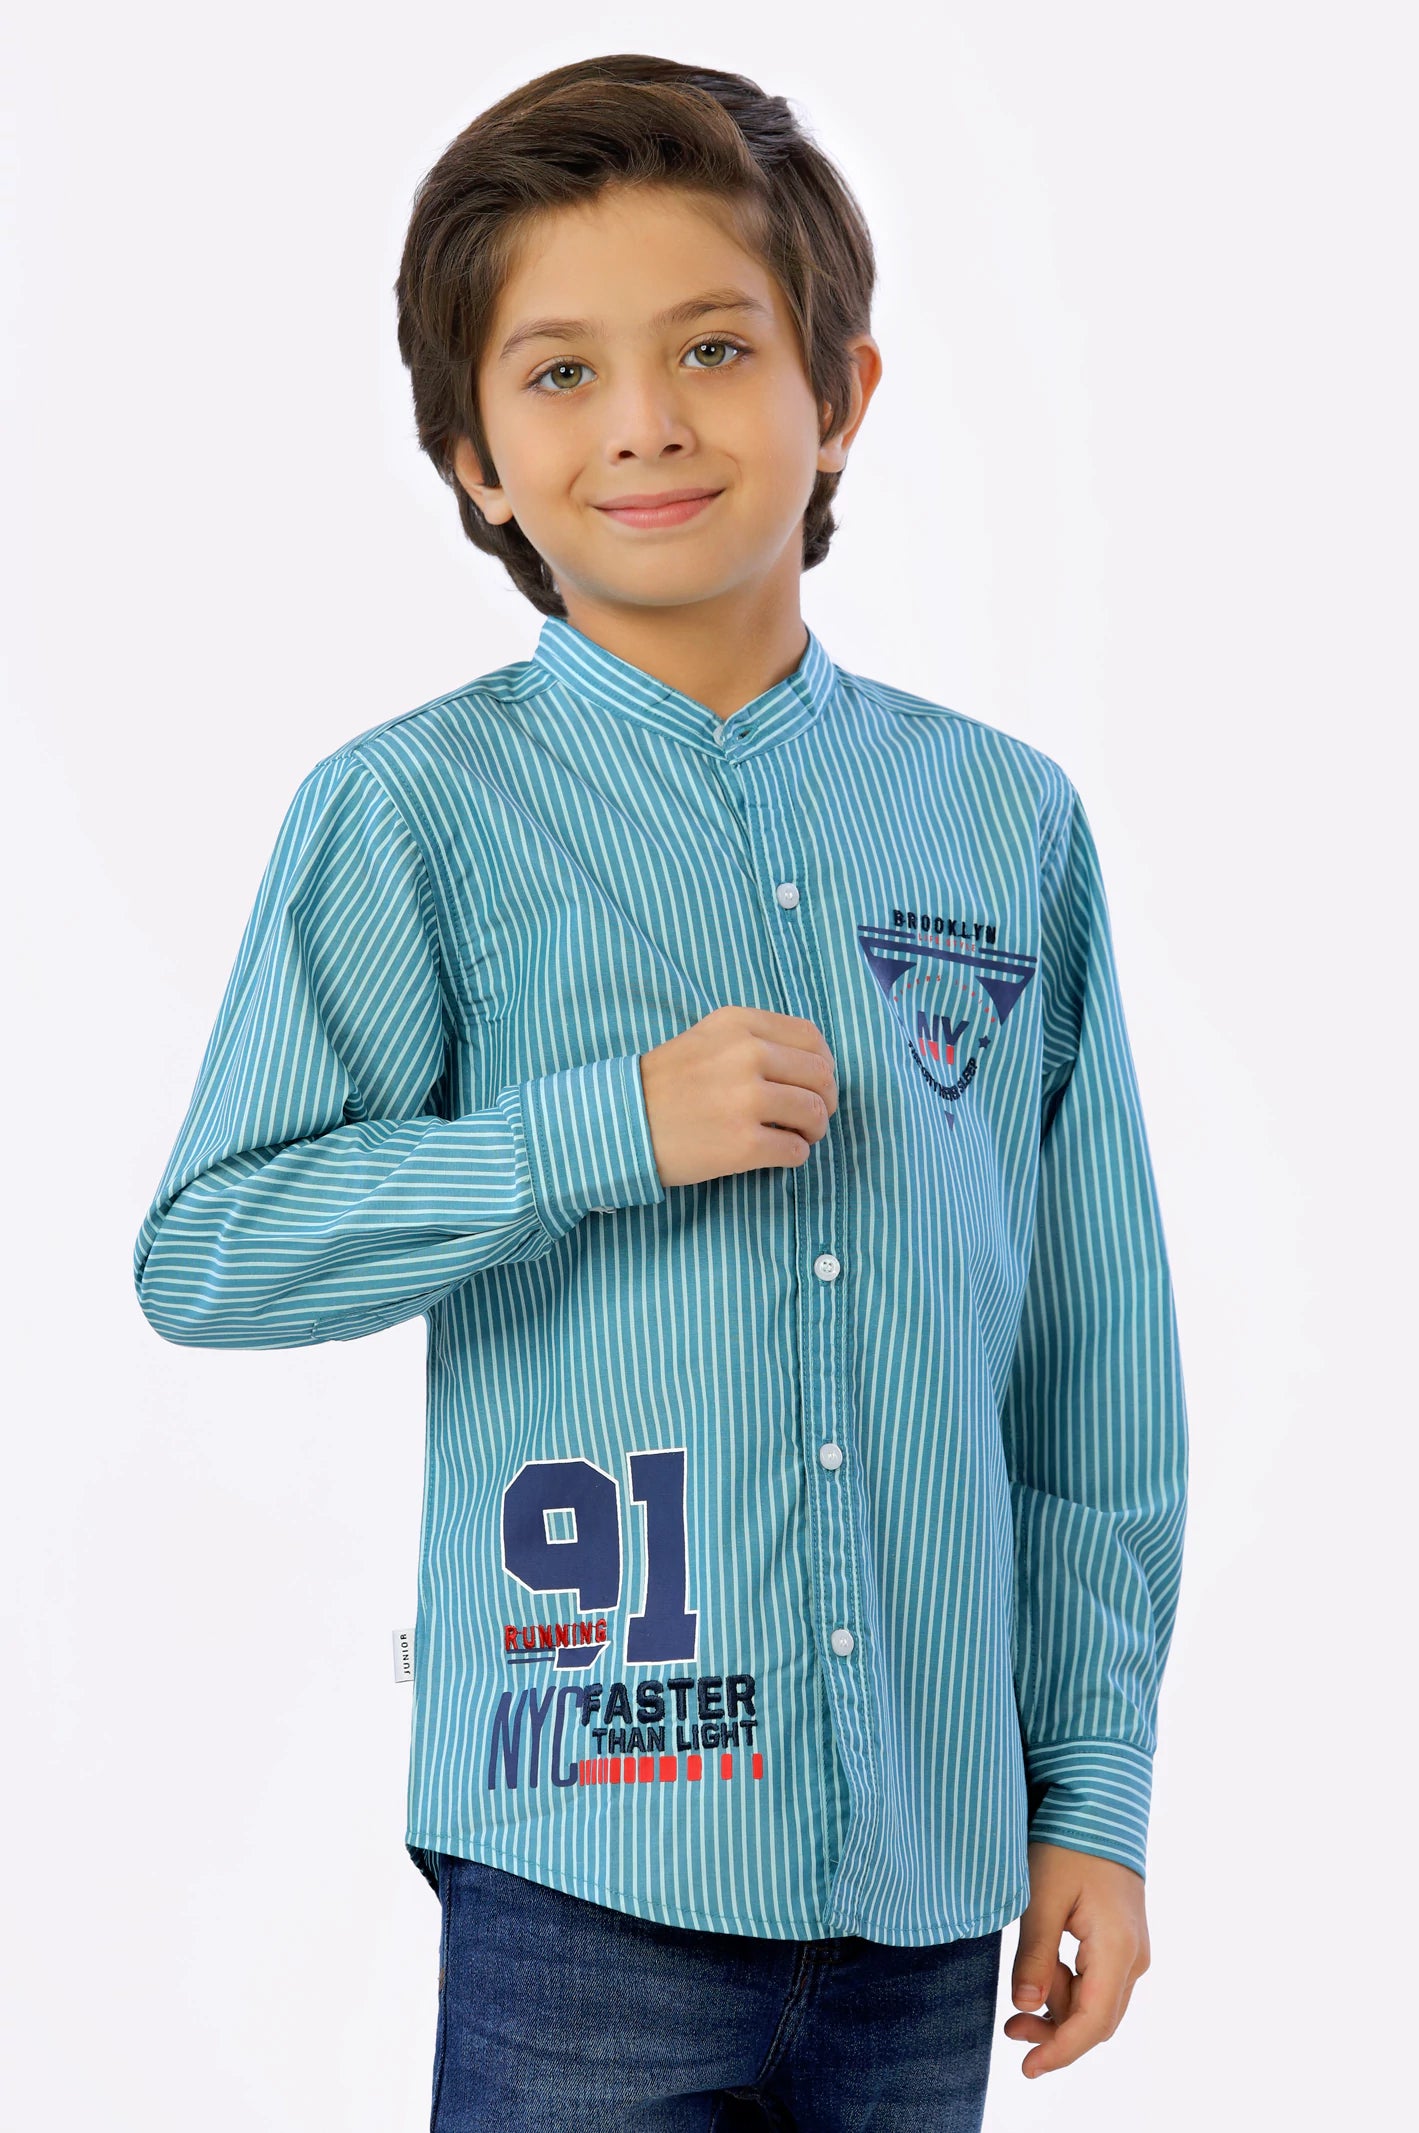 Green Pinstripe Boys Shirt From Diners